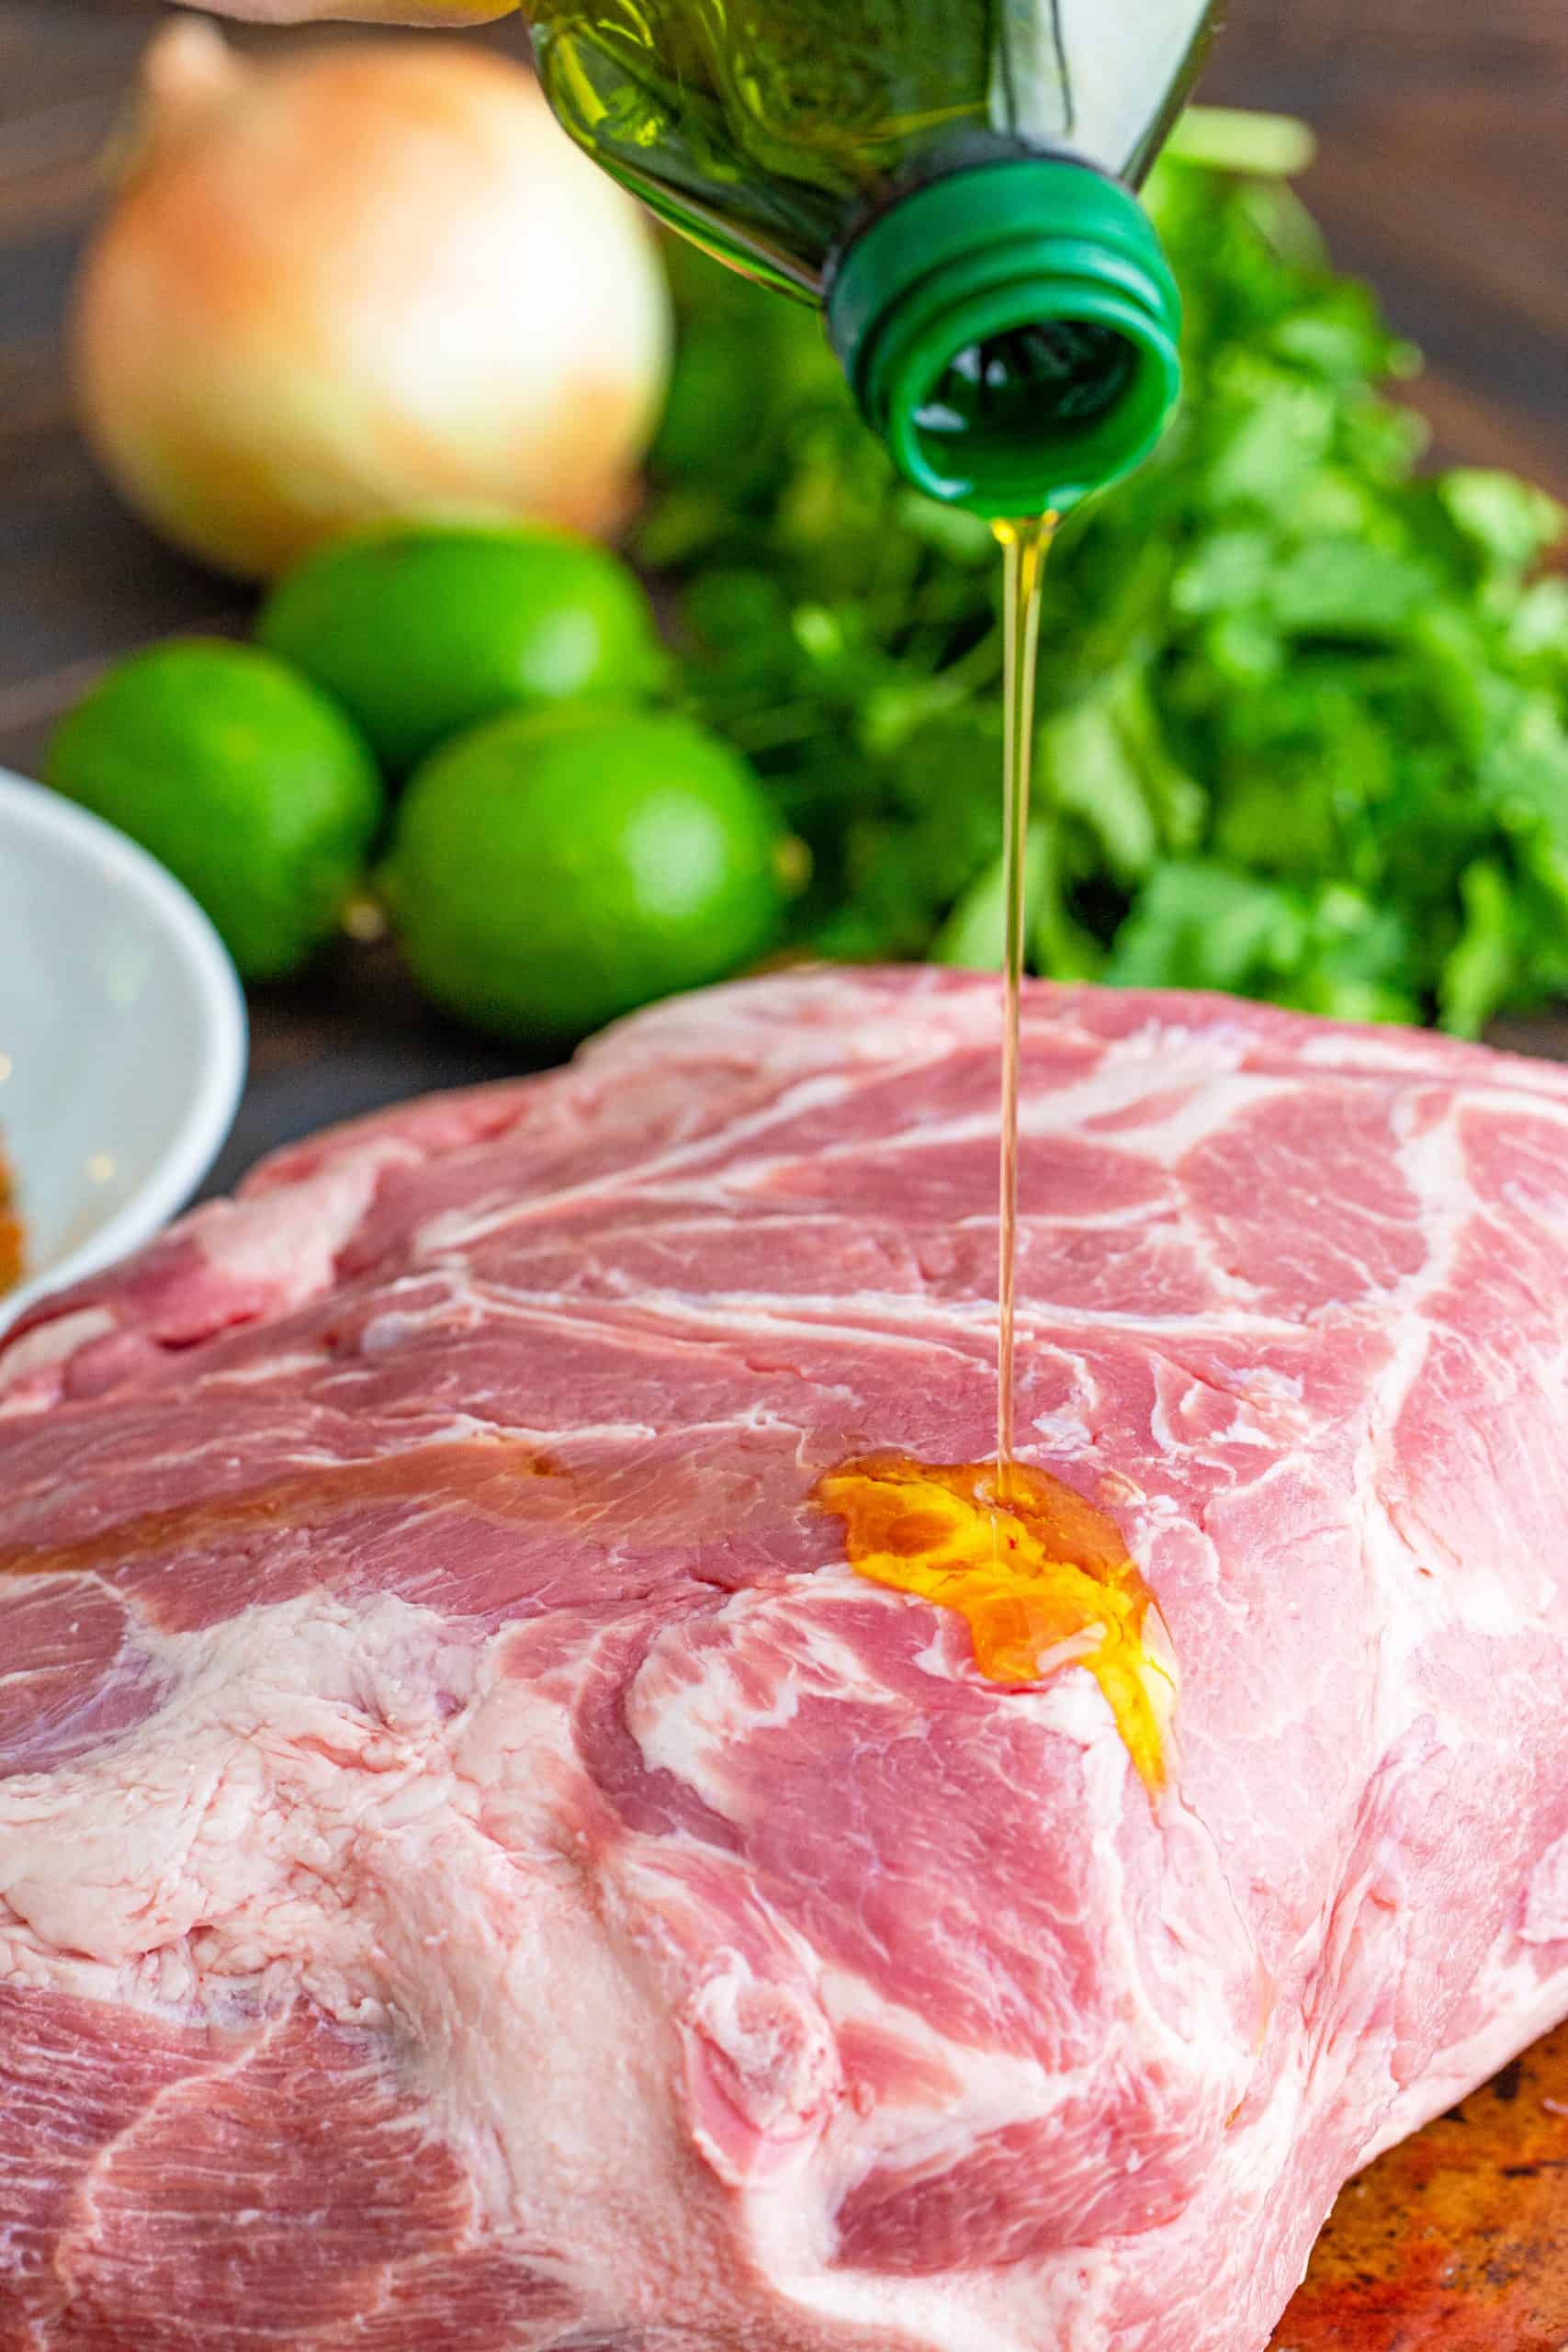 pouring olive oil on a pork roast.